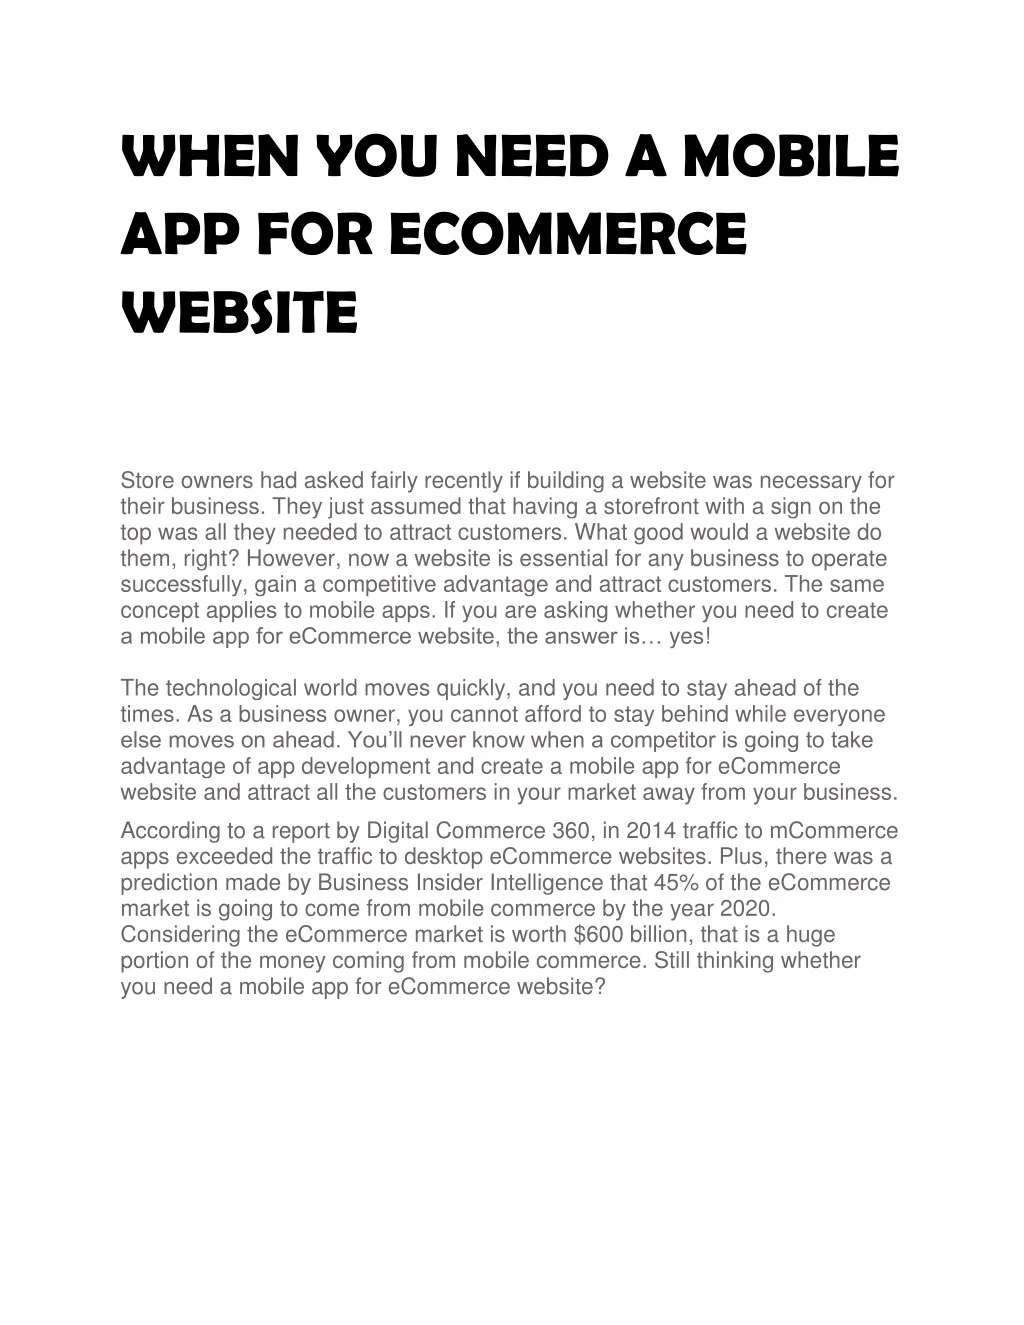 when you need a mobile app for ecommerce website